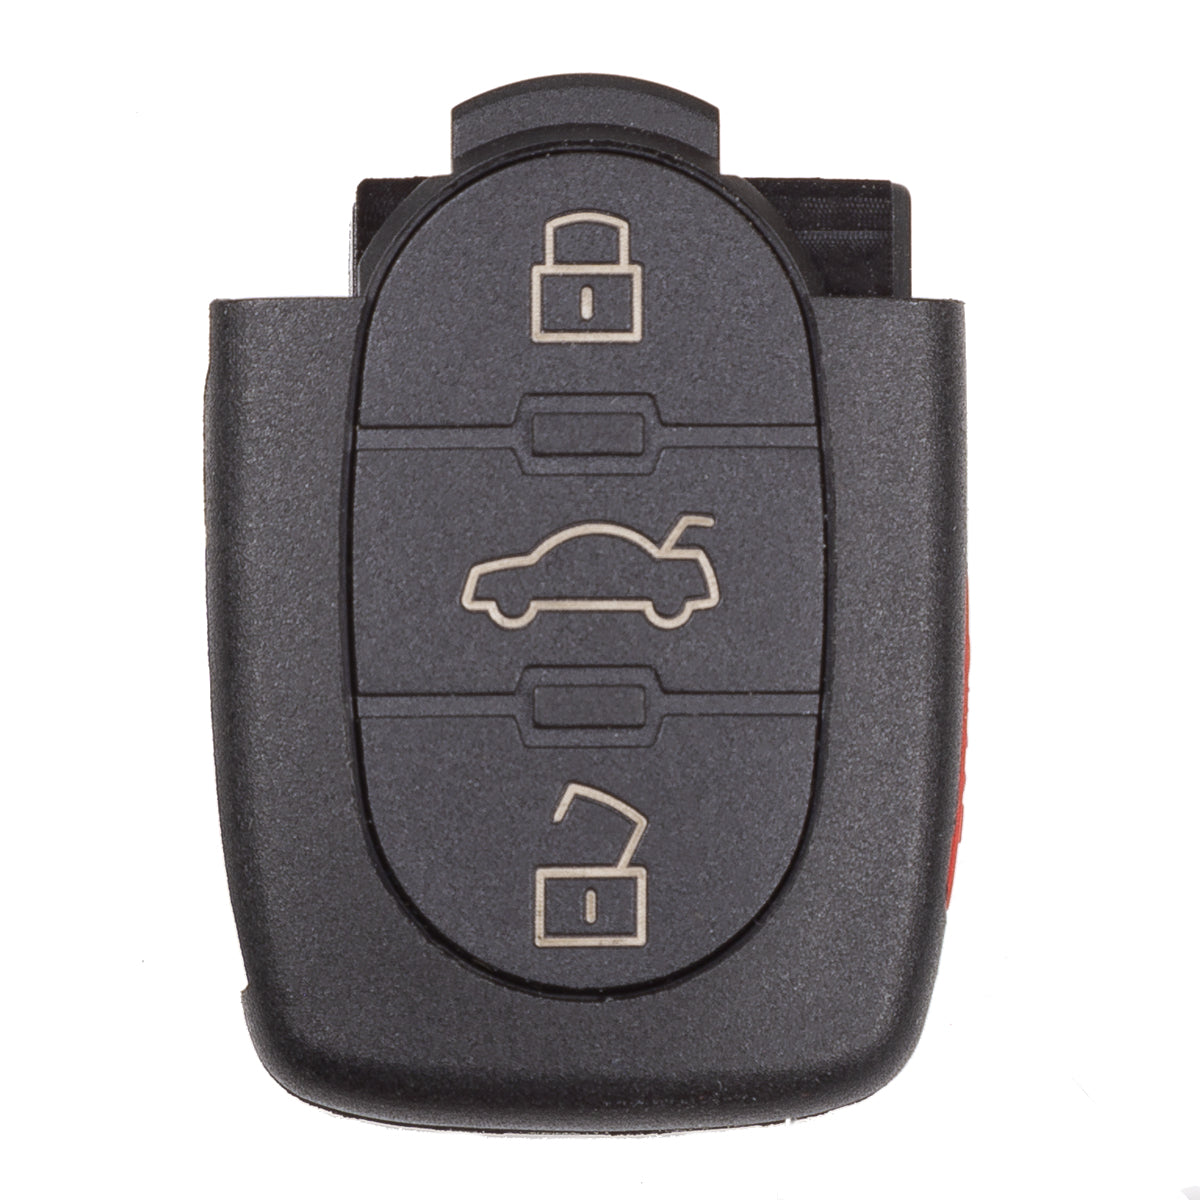 Flip Key Fob-Remote Part Compatible with Volkswagen (Old Fashion) 1998 1999 2000 2001 2002 4B Part # 1J0 959 753F